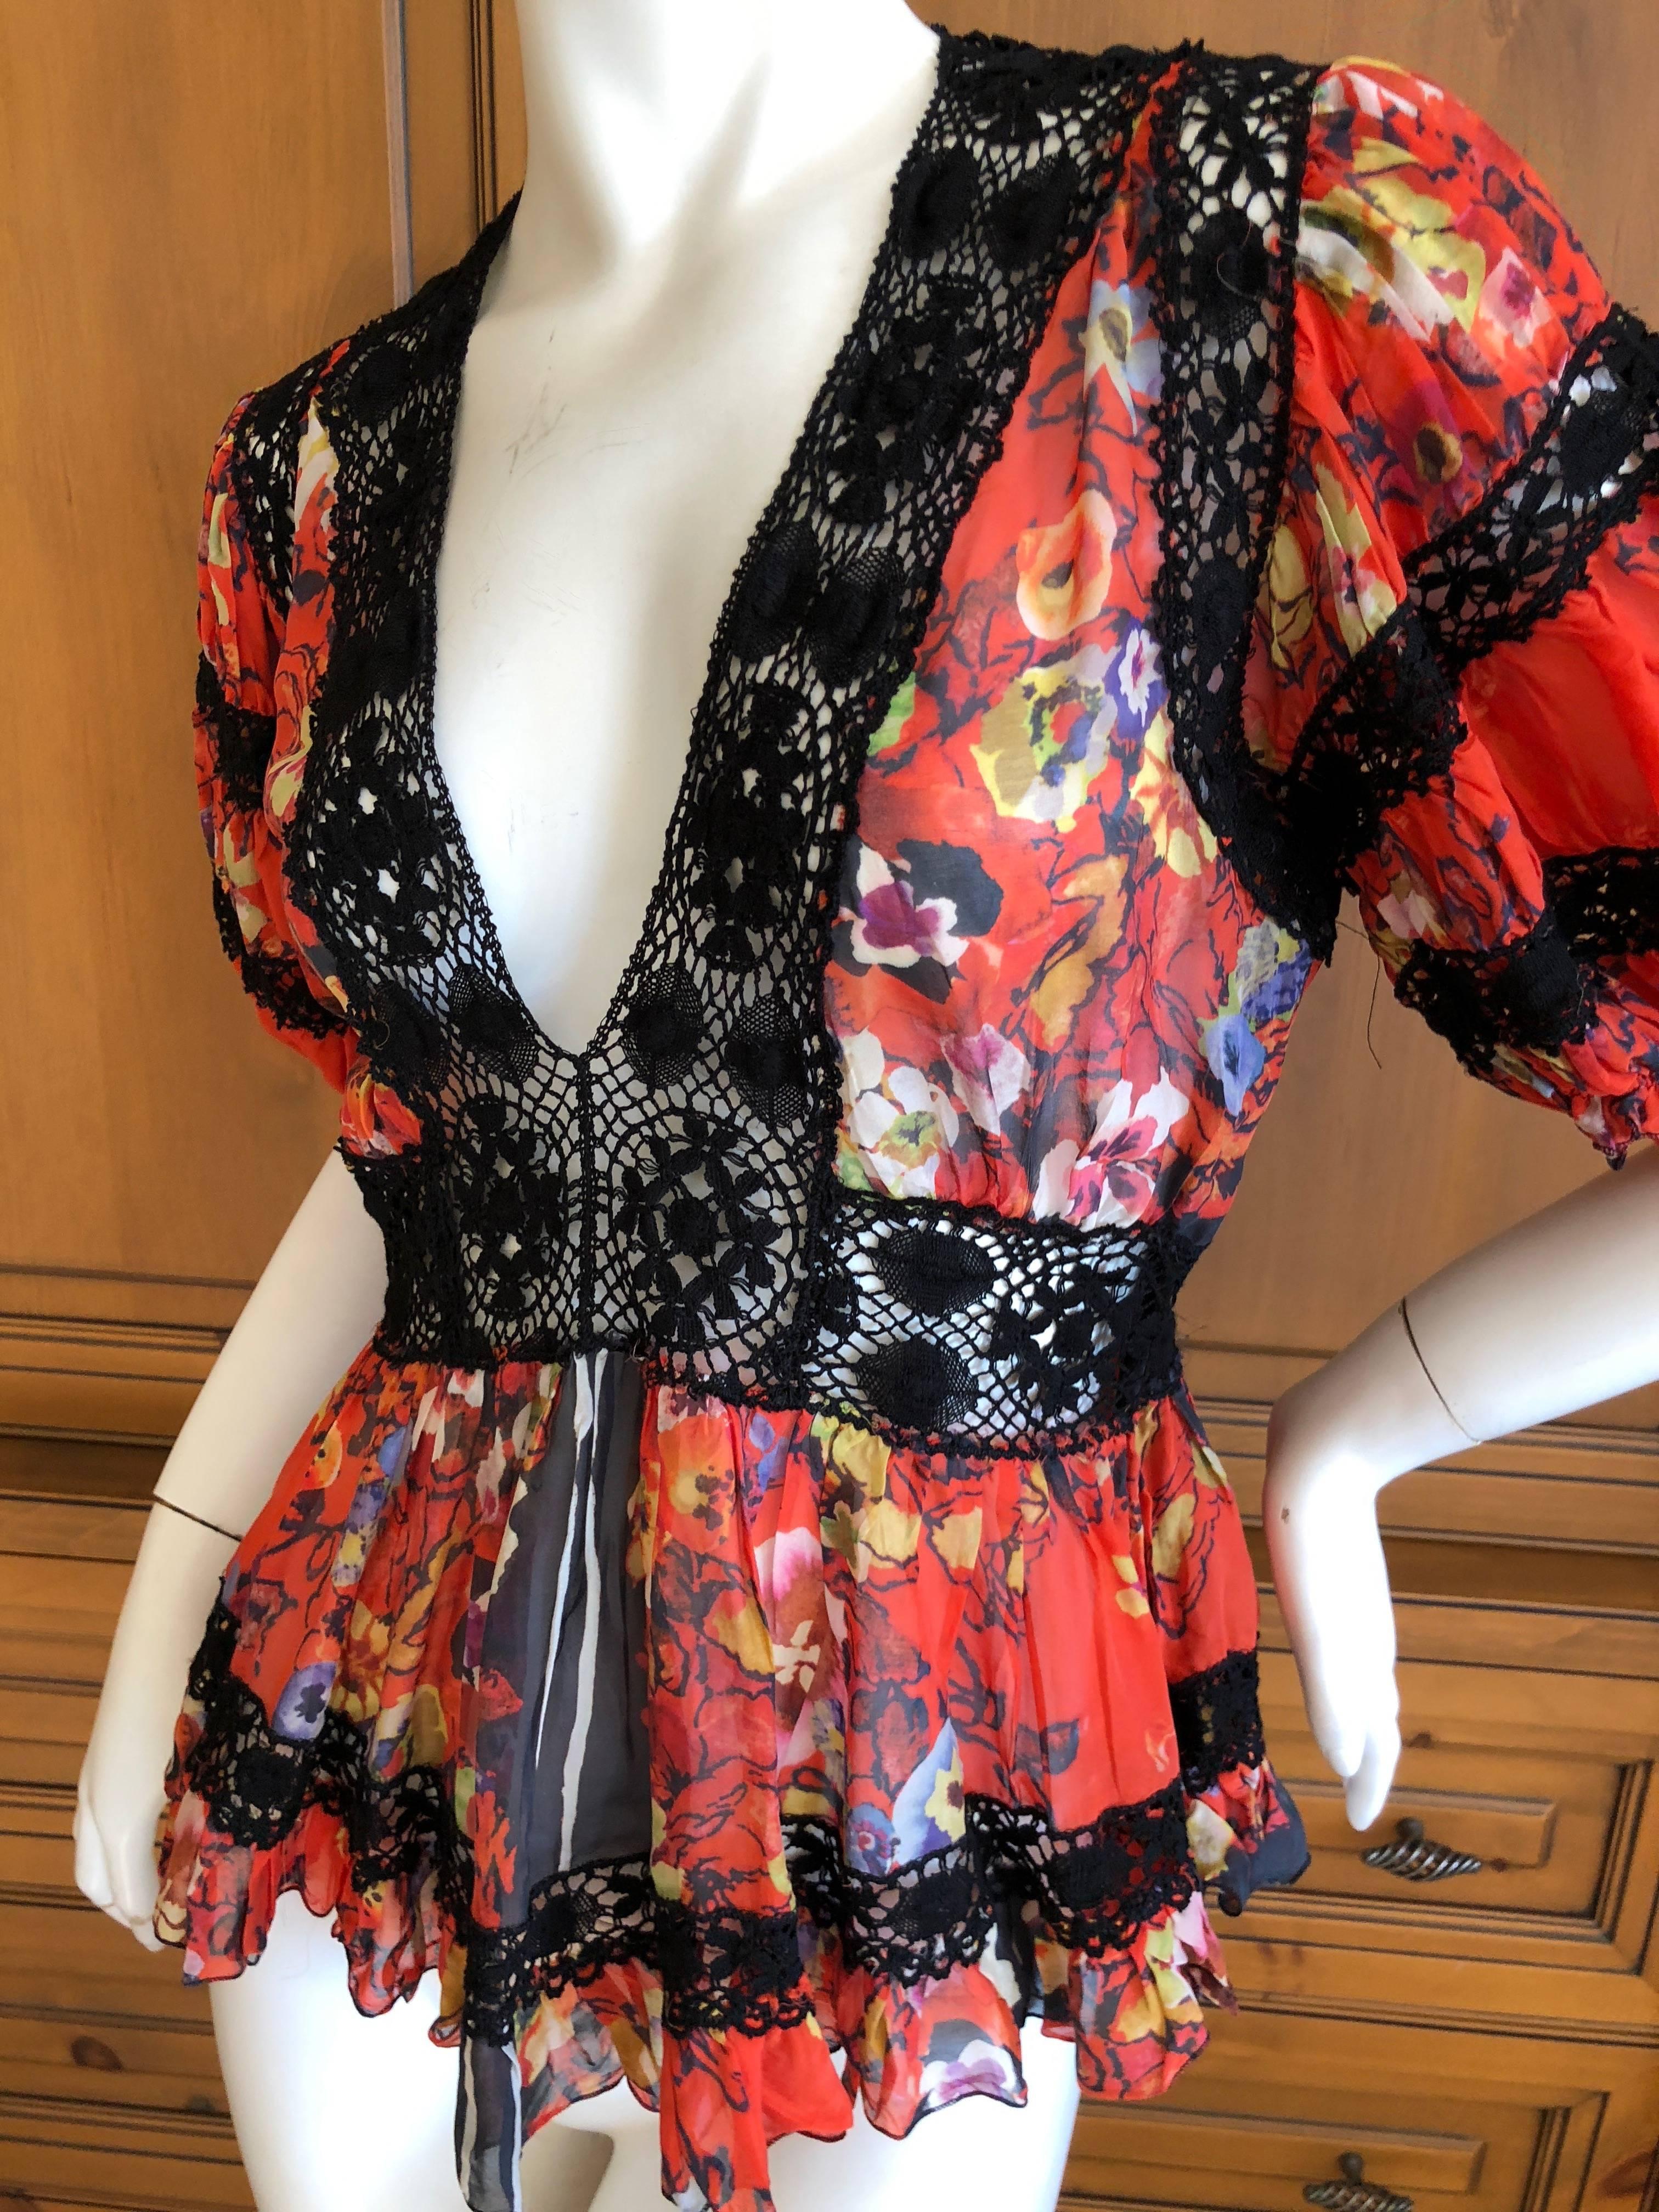 Jean Paul Gaultier Femme Spring 2006 Lace Floral Top Size 36 In Excellent Condition For Sale In Cloverdale, CA